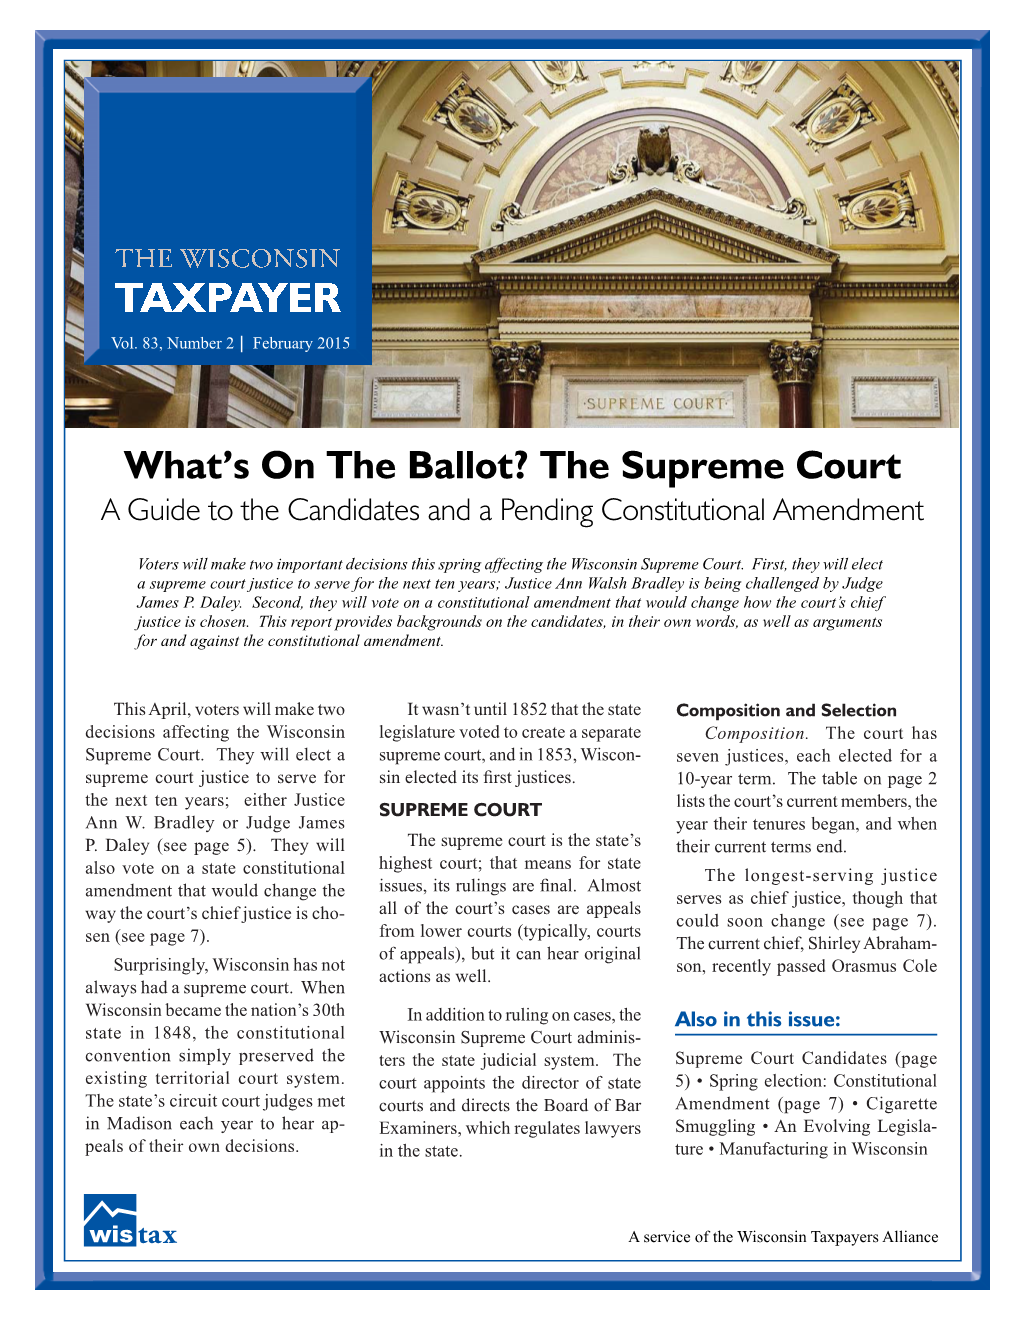 The Supreme Court a Guide to the Candidates and a Pending Constitutional Amendment